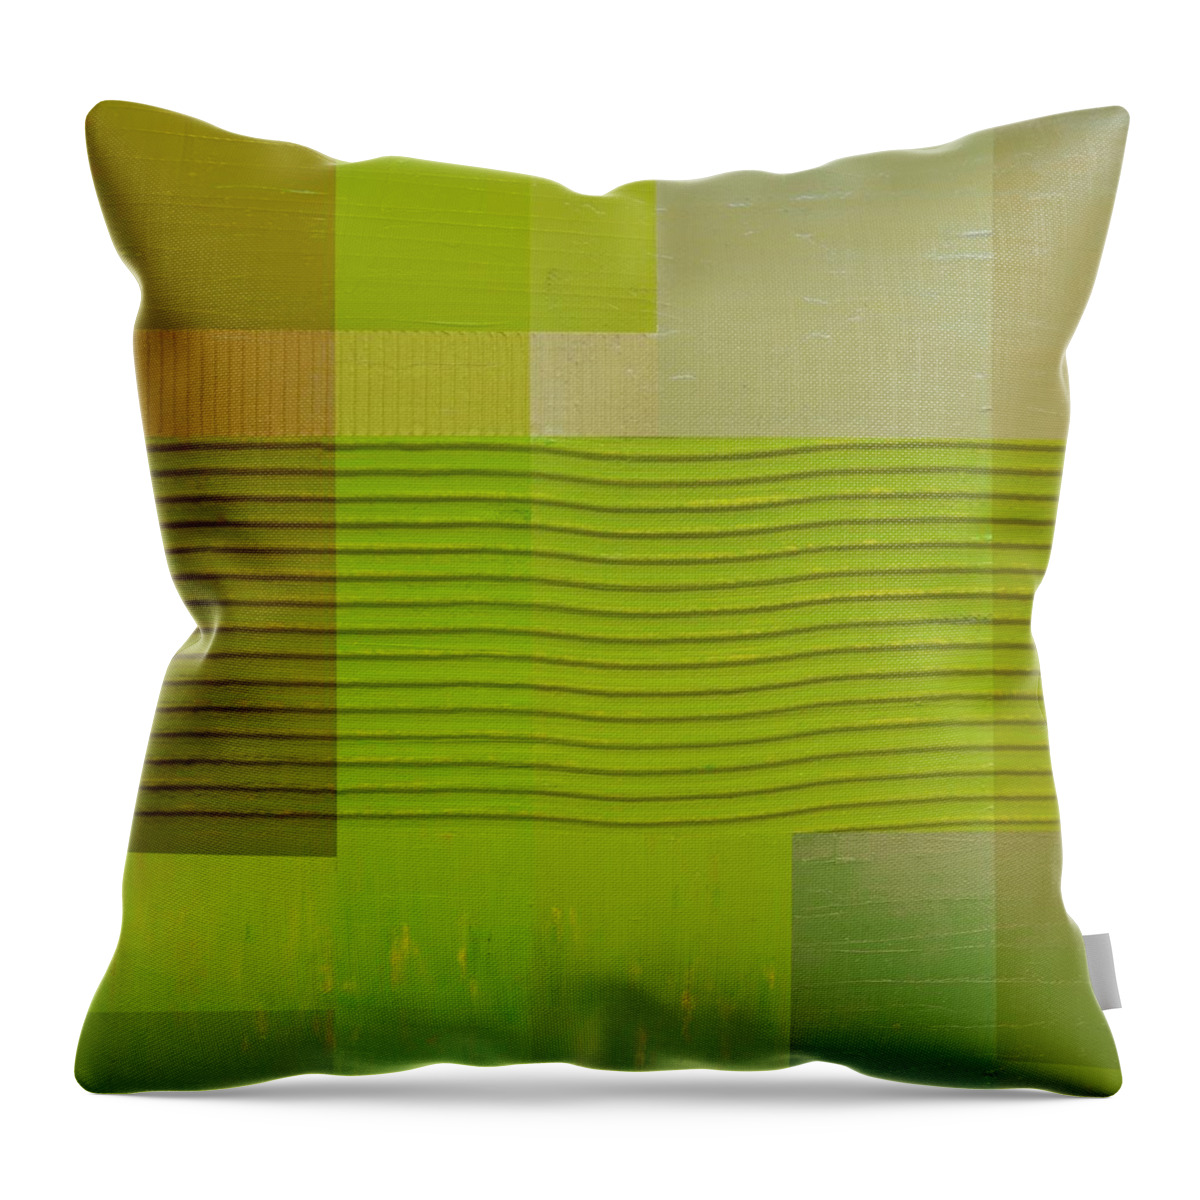 Yellow Throw Pillow featuring the painting Green with Wavy Stripes by Michelle Calkins